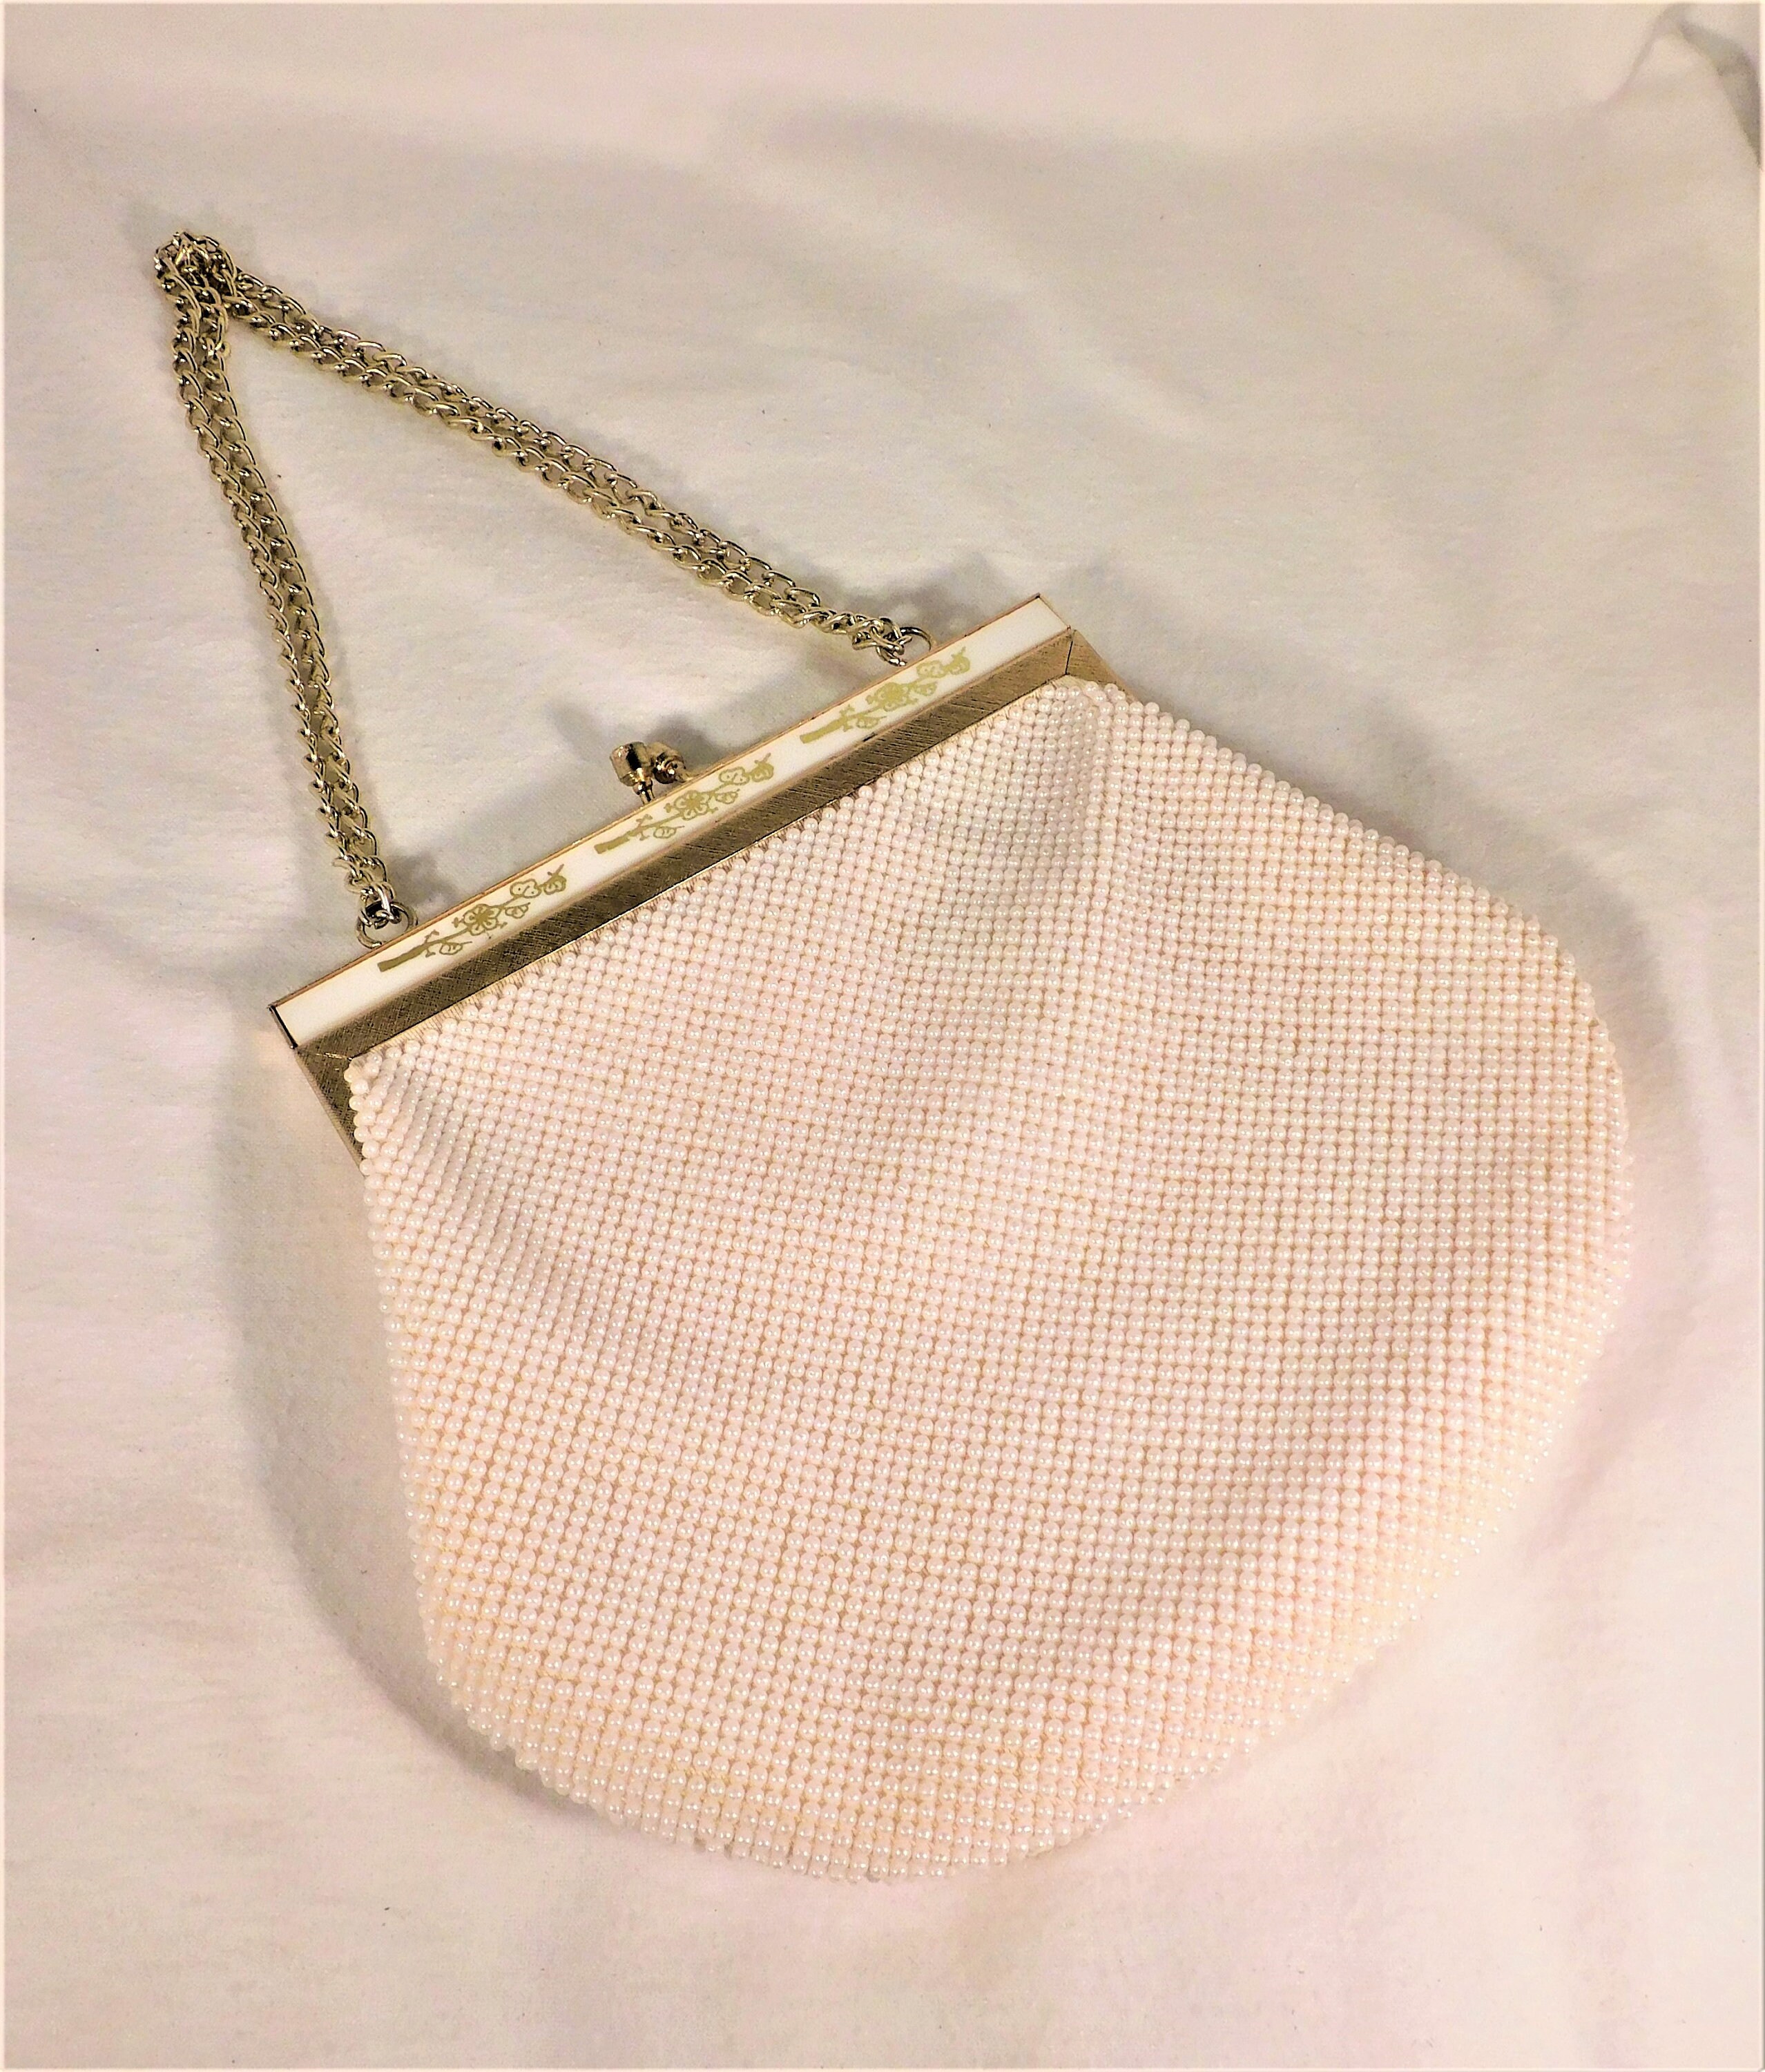 Embroidered Beaded White Floral Evening Bag Purse Gold tone frame